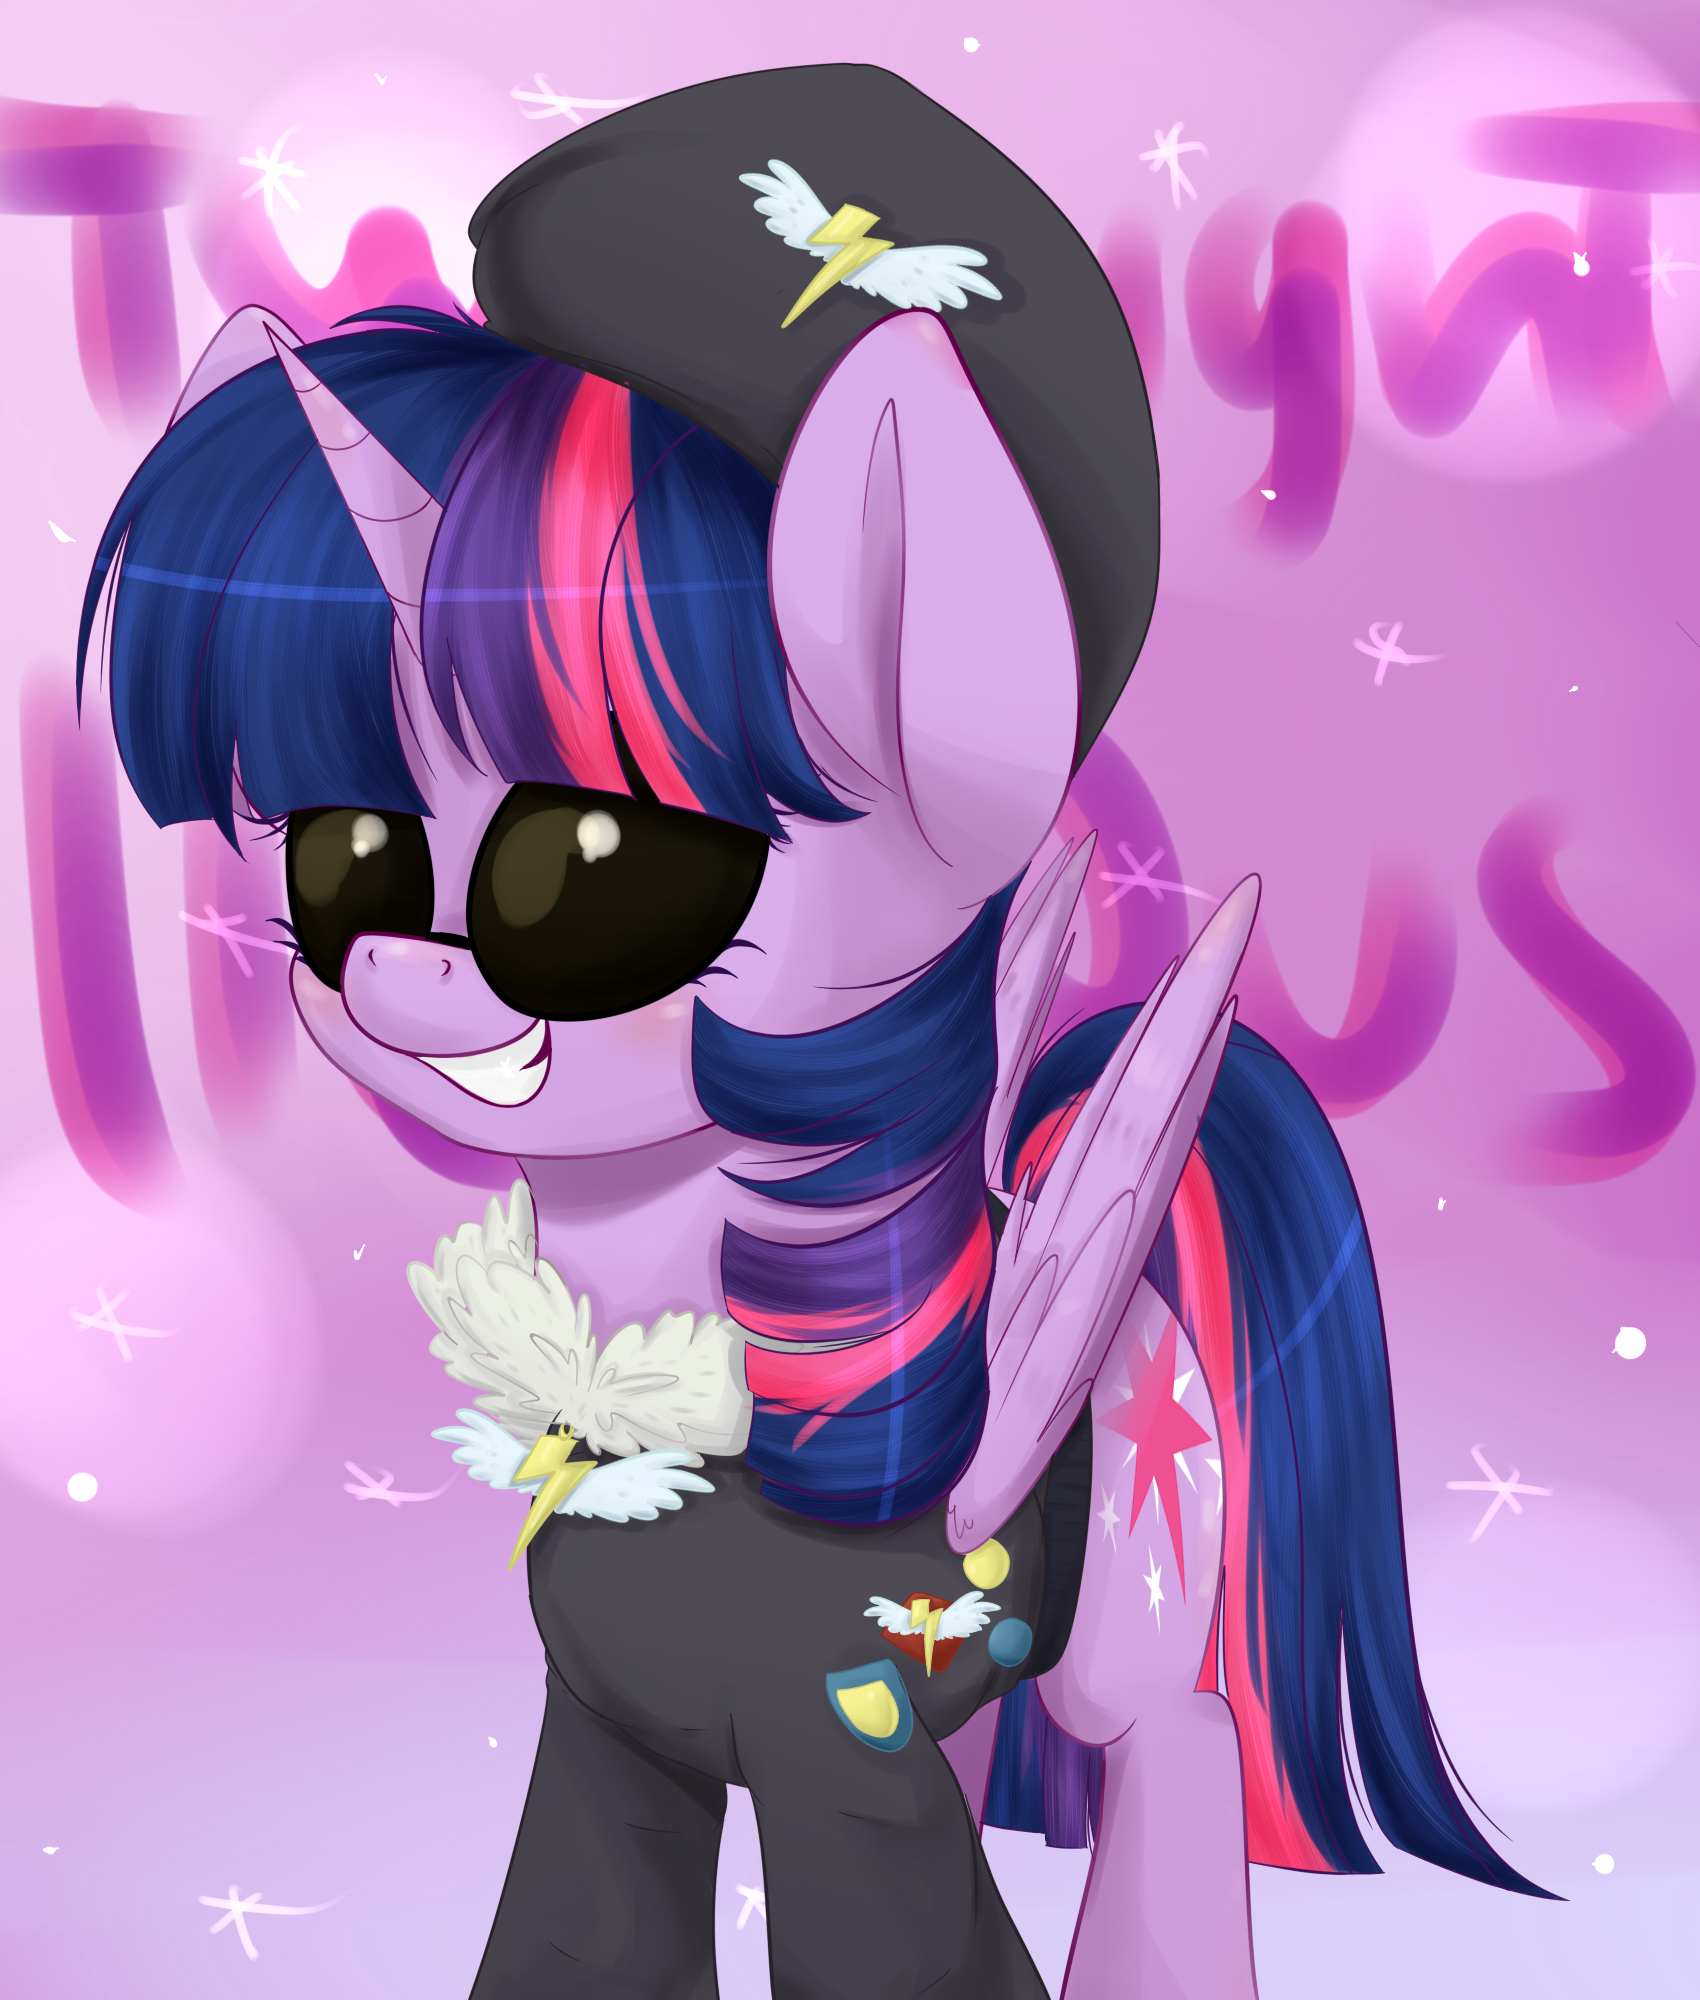 [Obrázek: twilightlicious_by_chiweee-d7d16xh.png]